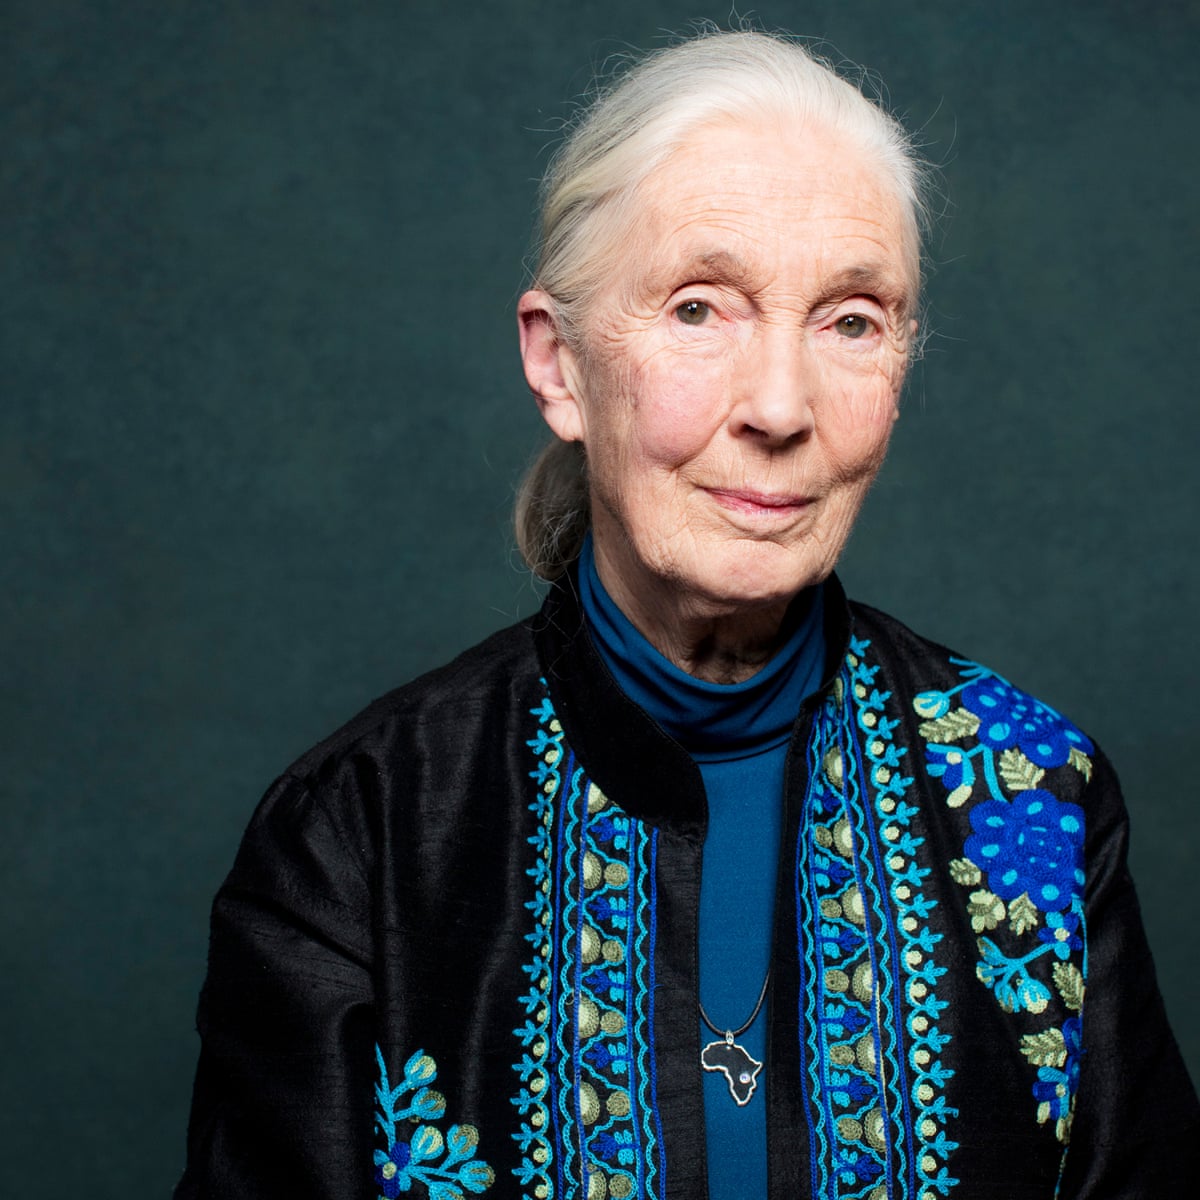 Jane Goodall Speaking Schedule 2022 Jane Goodall: 'Change Is Happening. There Are Many Ways To Start Moving In  The Right Way' | Climate Crisis | The Guardian